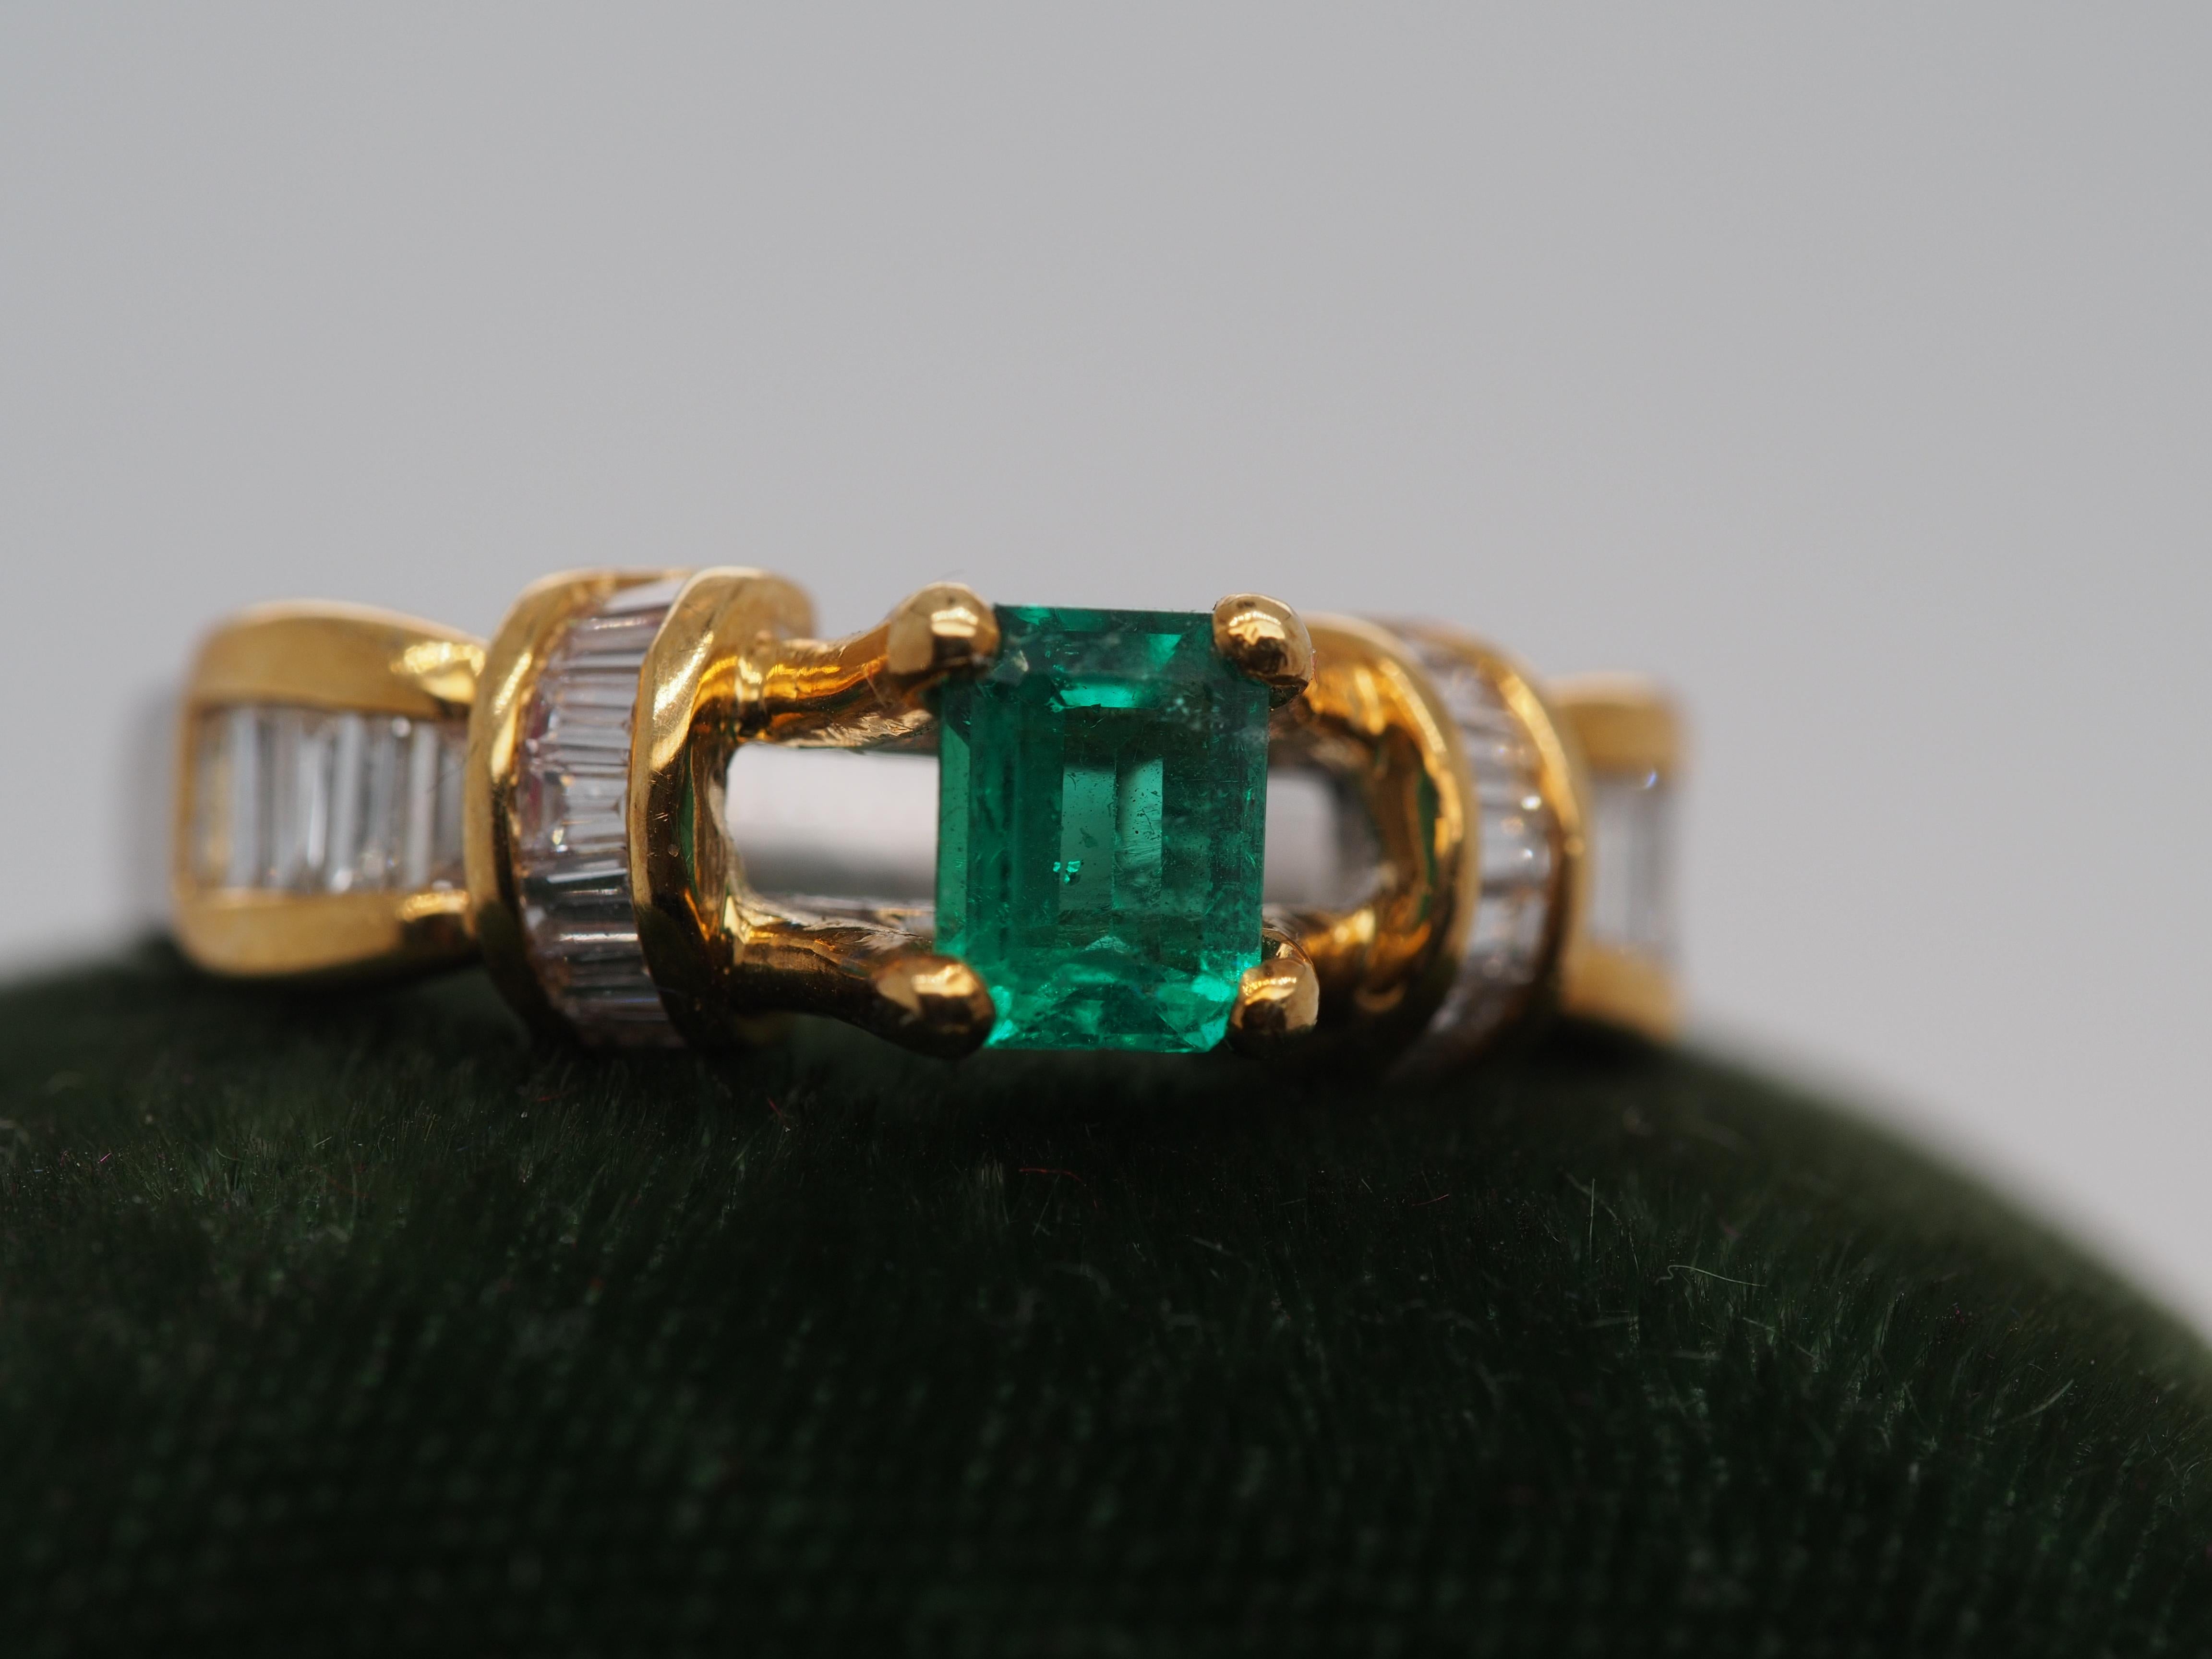 Item Details:
Ring Size: 7.5
Metal Type: 18k White Gold [Hallmarked, and Tested]
Weight: 7.6 grams
‌
Center Stone Details:
.75ct, Emerald (Natural), Green
‌
Diamond Details:
Diamond Weight: .75ct, total weight
Shape: Baguette
Color: E-F
Clarity: